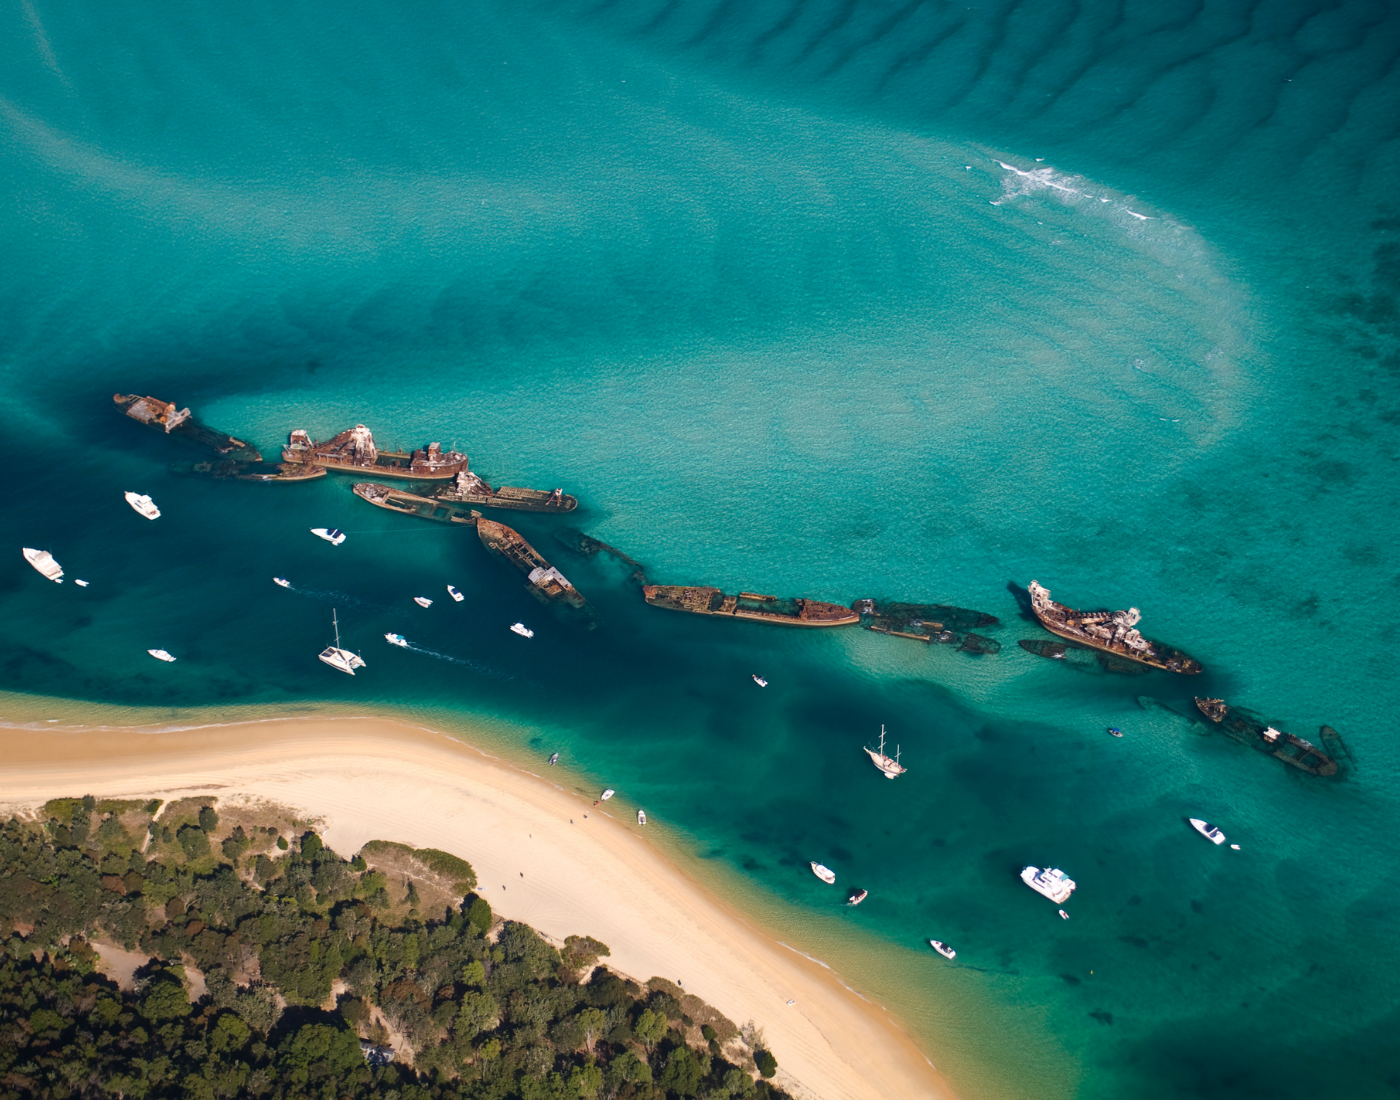 Tour 11 – Tangalooma Shipwrecks Scenic VIP Helicopter Experience